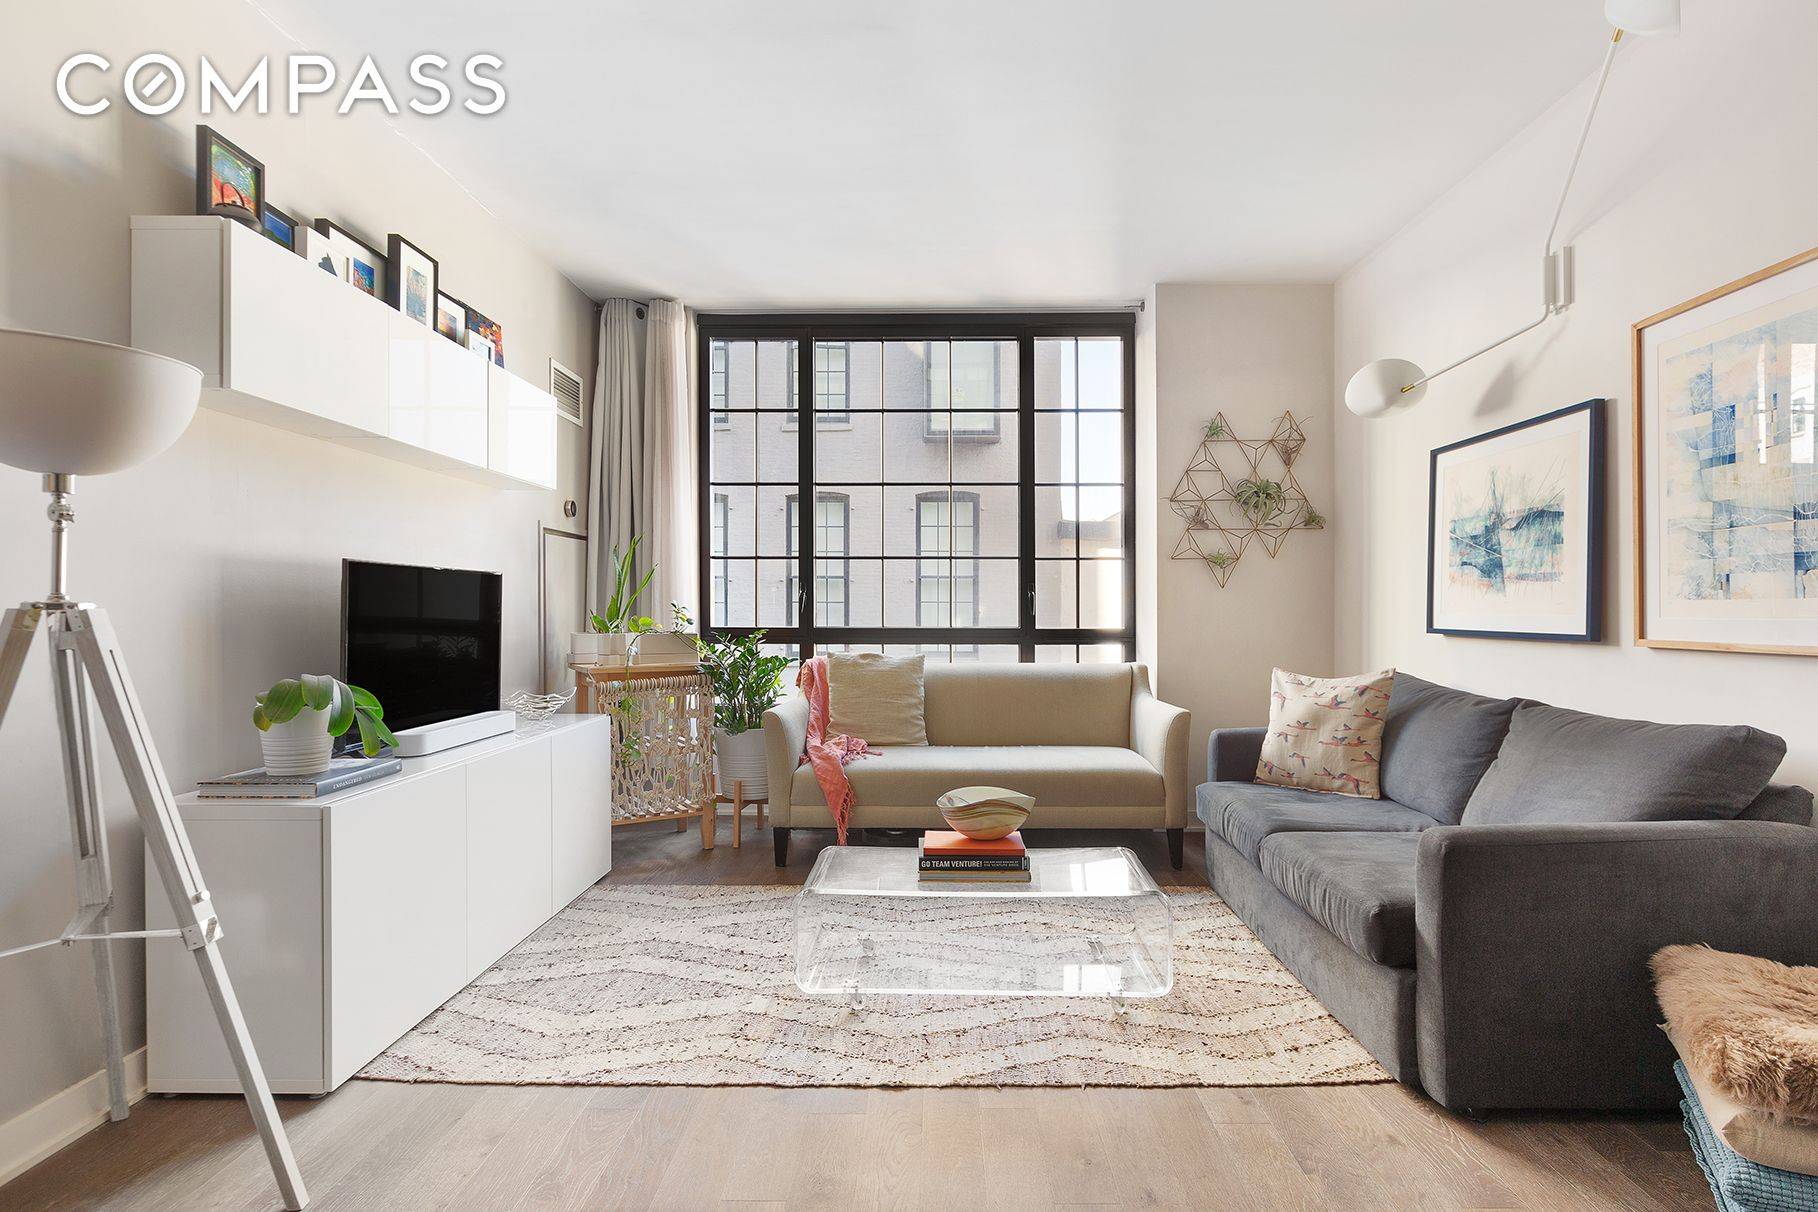 Ideally located on a cobblestone street in the heart of DUMBO is 205 Water Street.